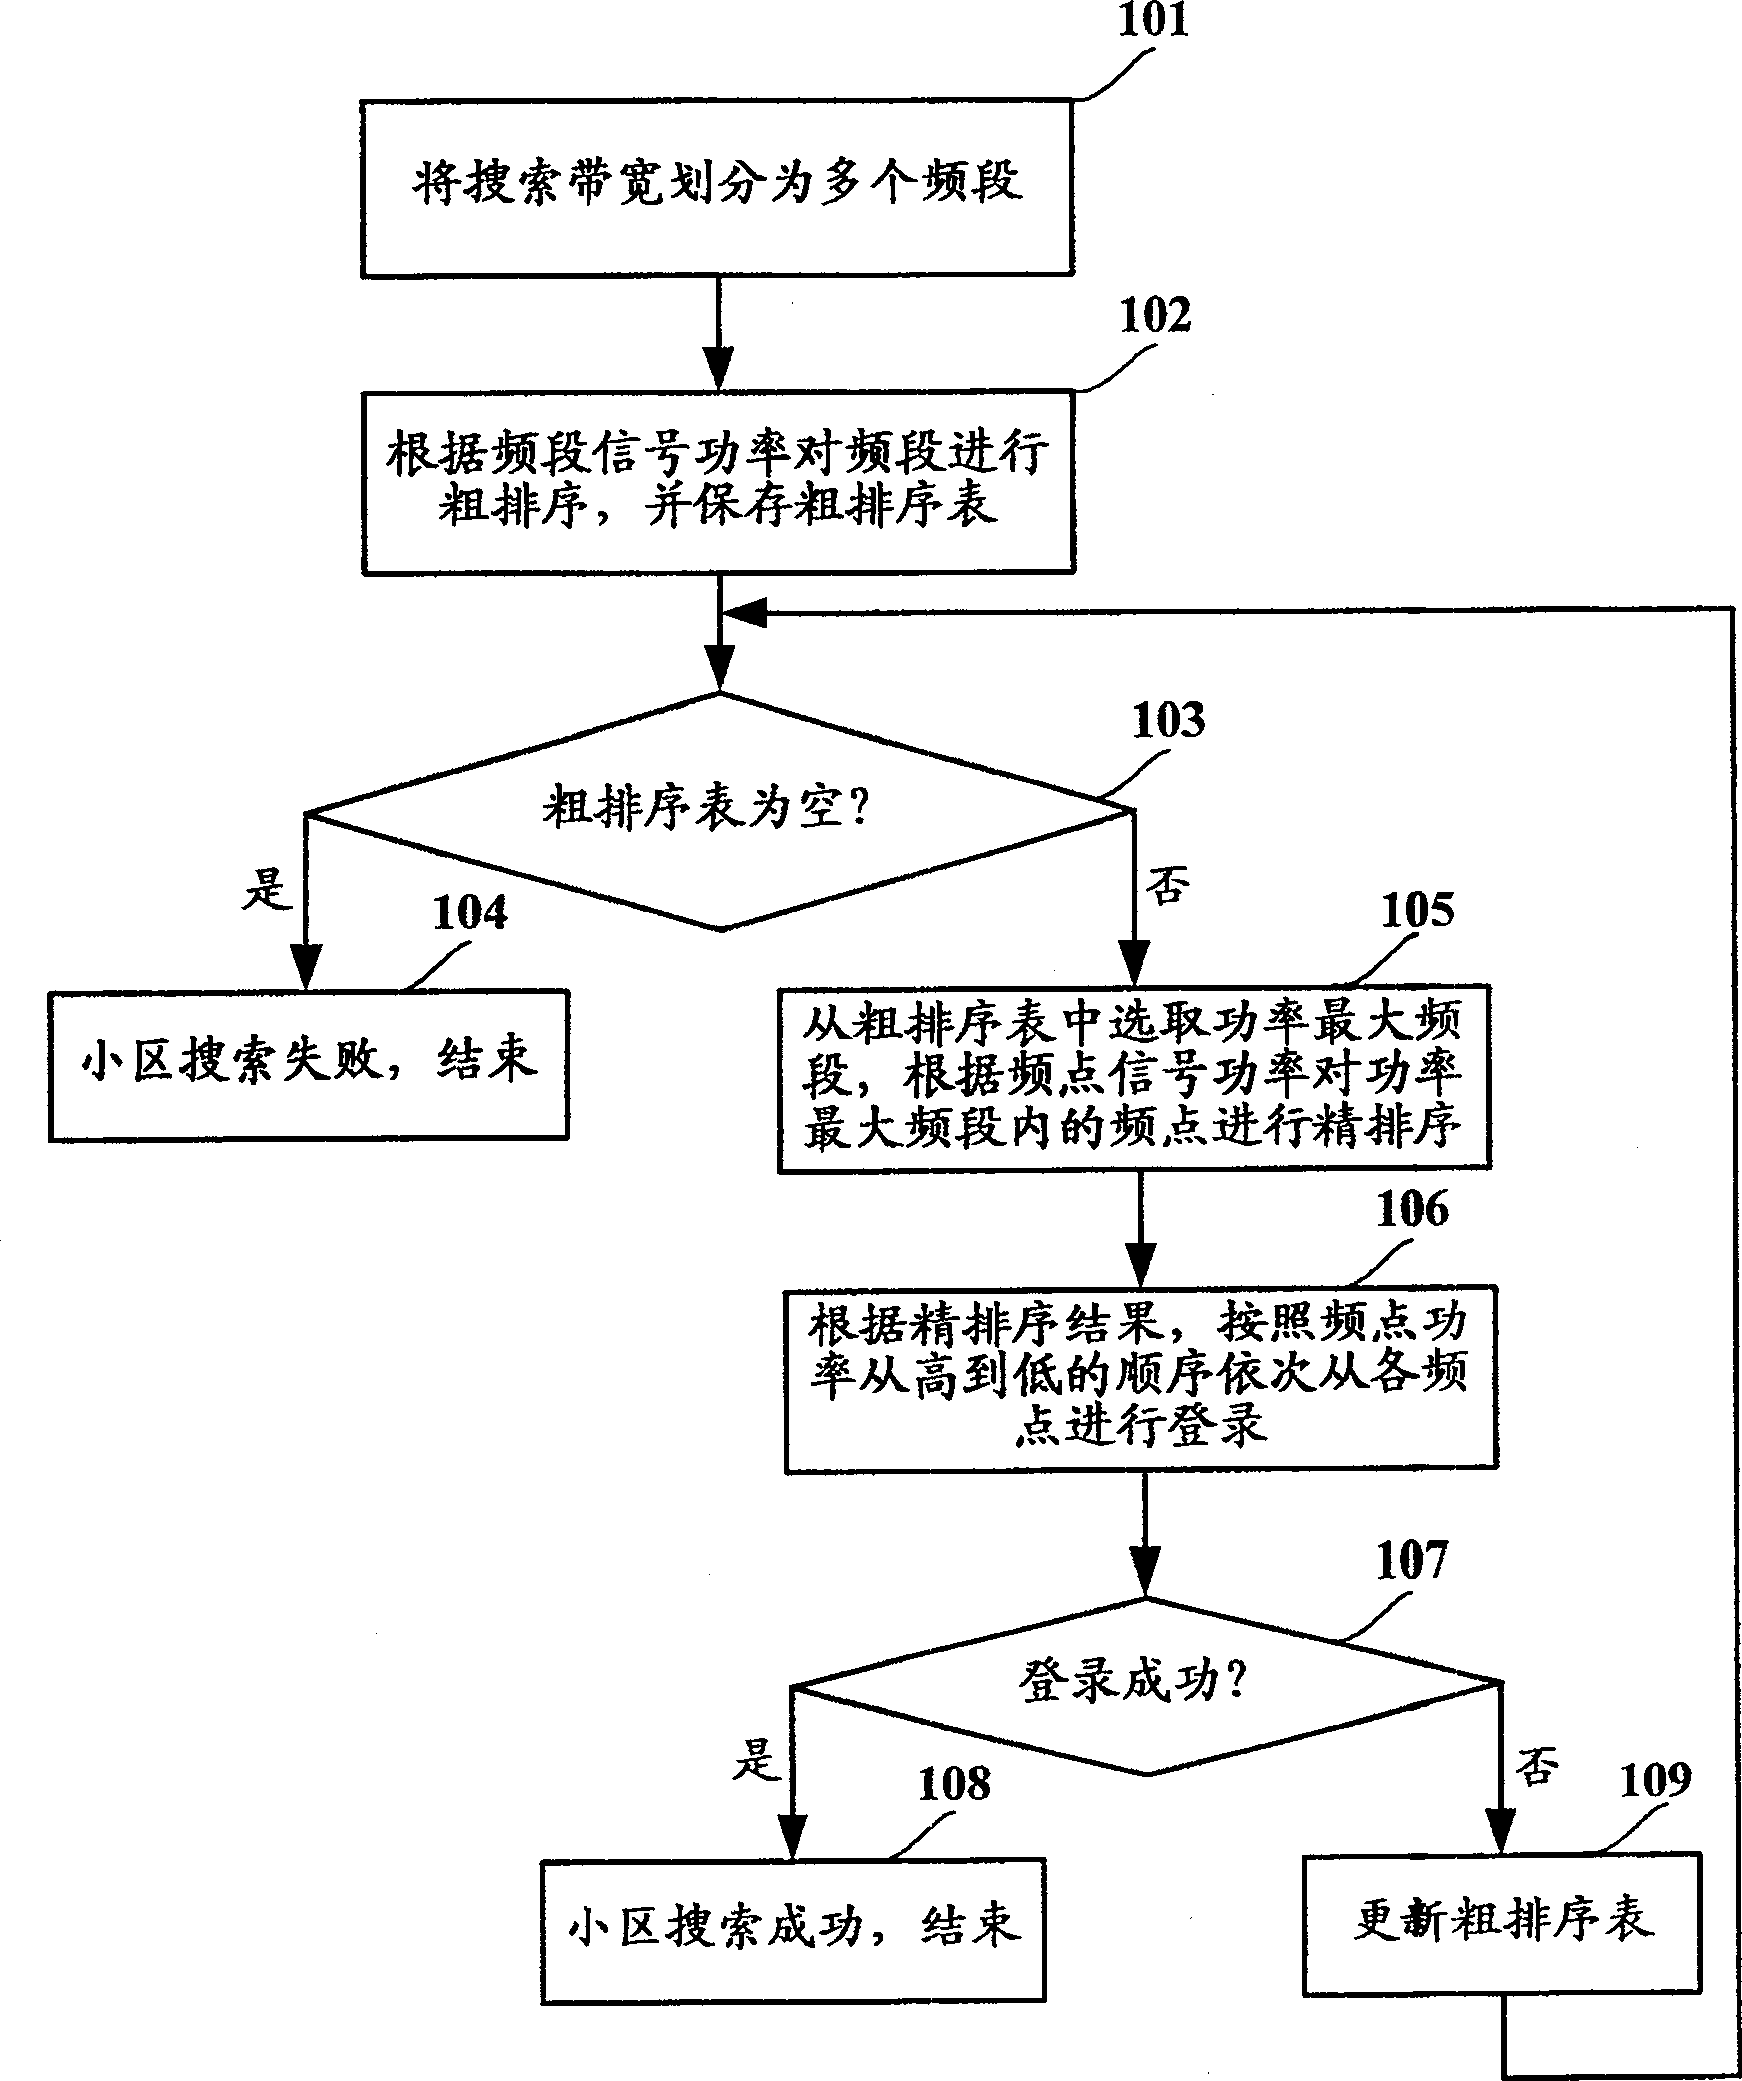 Method and apparatus for cell search